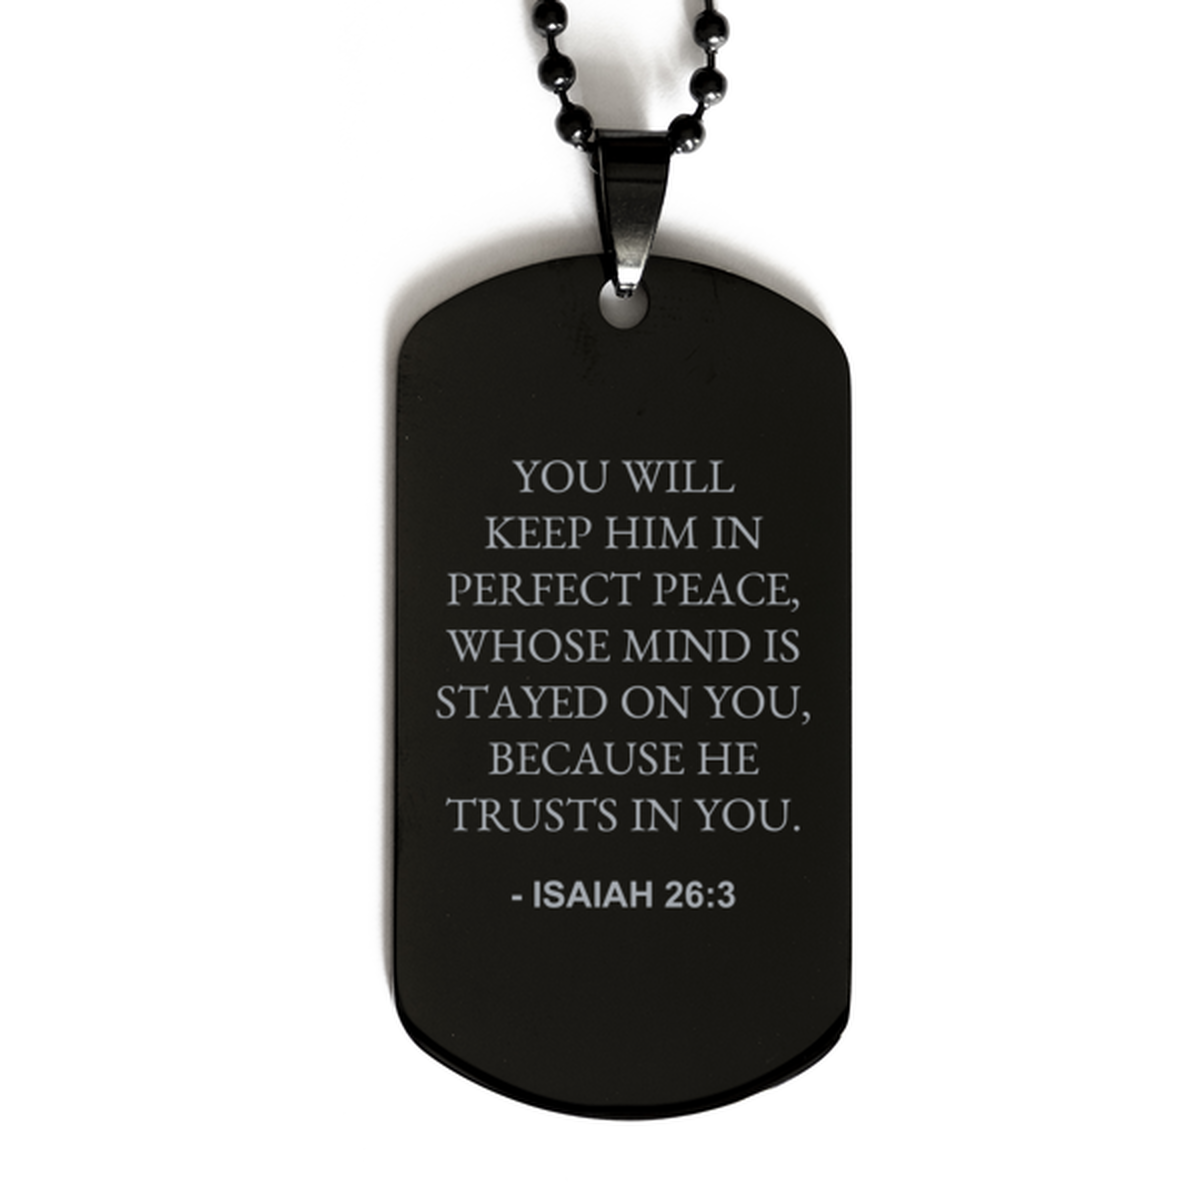 Bible Verse Black Dog Tag, Isaiah 26:3 You Will Keep Him In Perfect Peace, Whose Mind, Christian Inspirational Necklace Gifts For Men Women